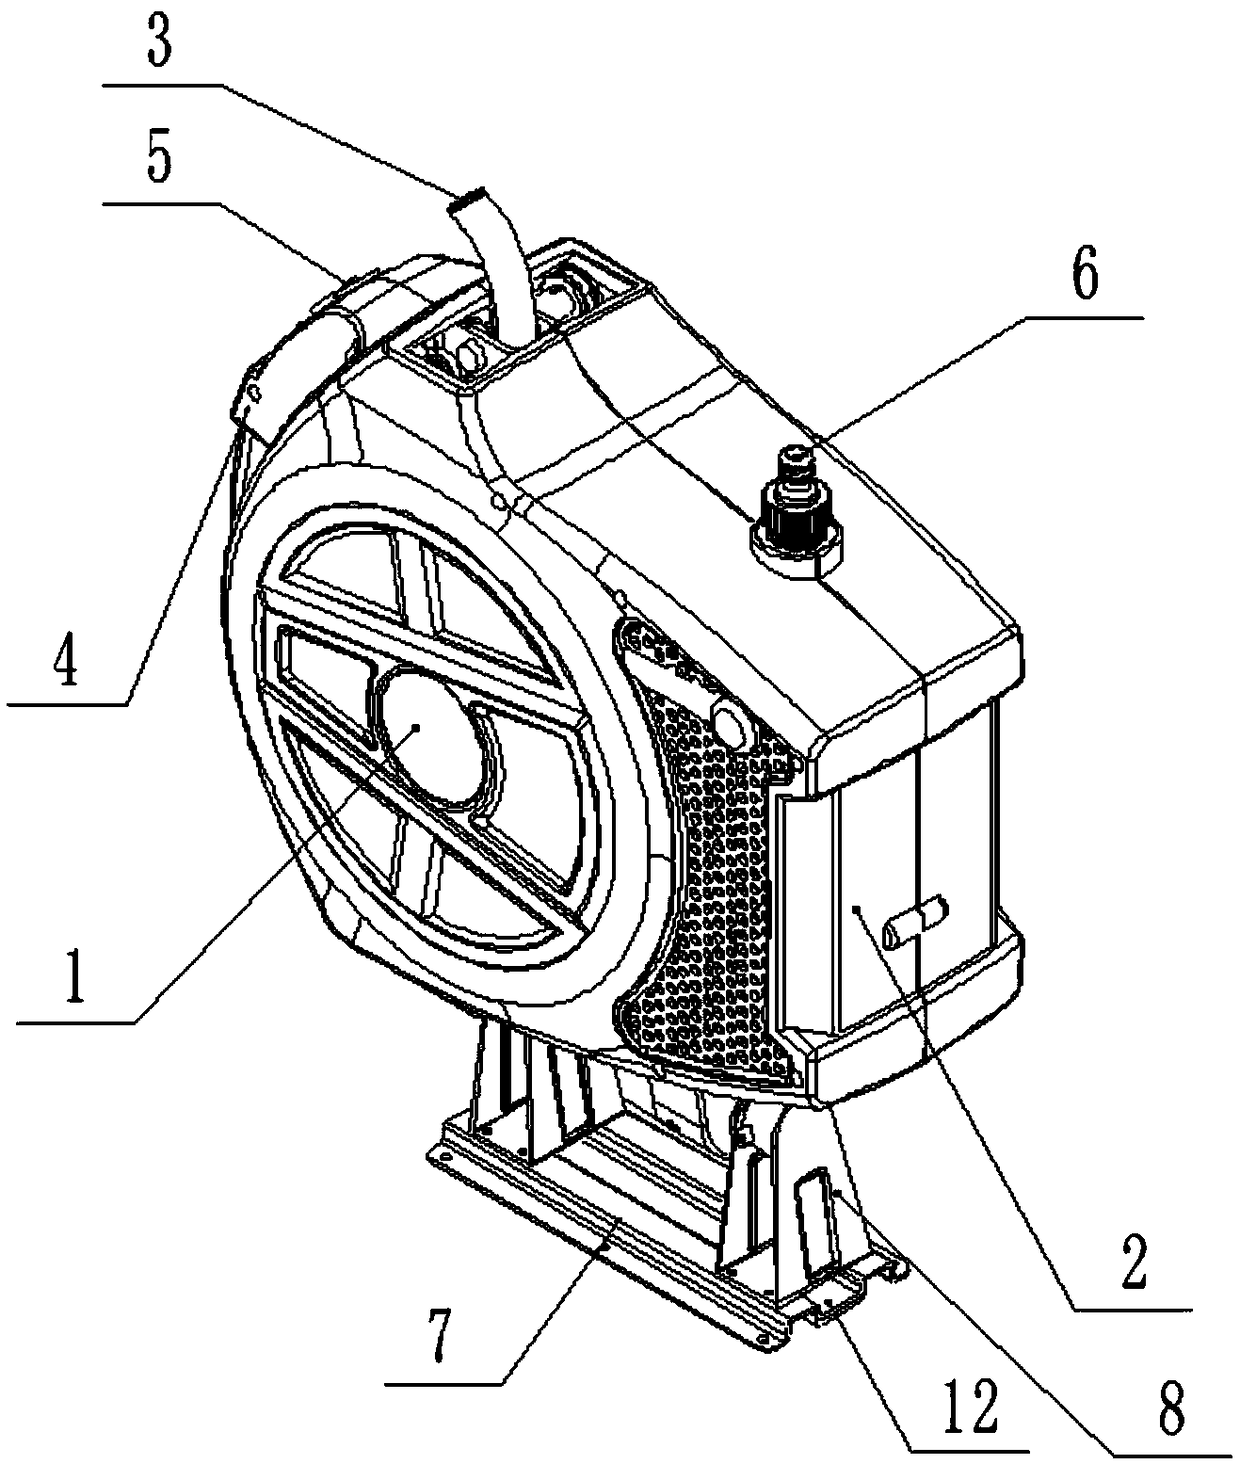 A reel device capable of changing the flushing pressure